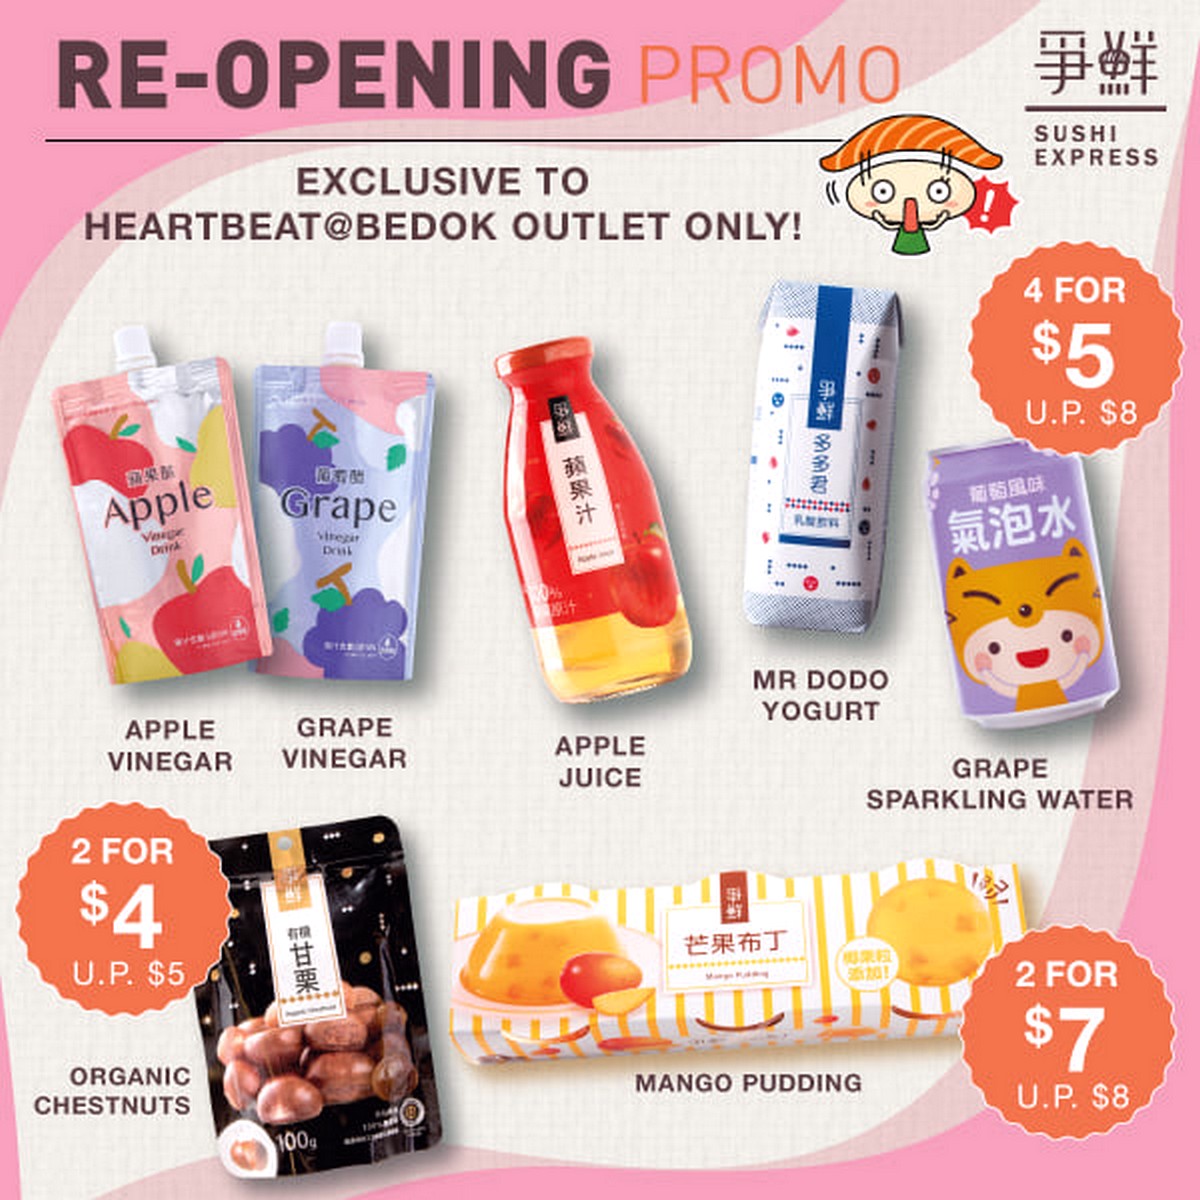 Sushi-Express-FREE-1-Plate-of-Sushi-2021-Singapore-Japanese-Food-Promotion-002 19-23 Apr 2021: Sushi Express Re-Opening Special Promotion at Heartbeat @ Bedok